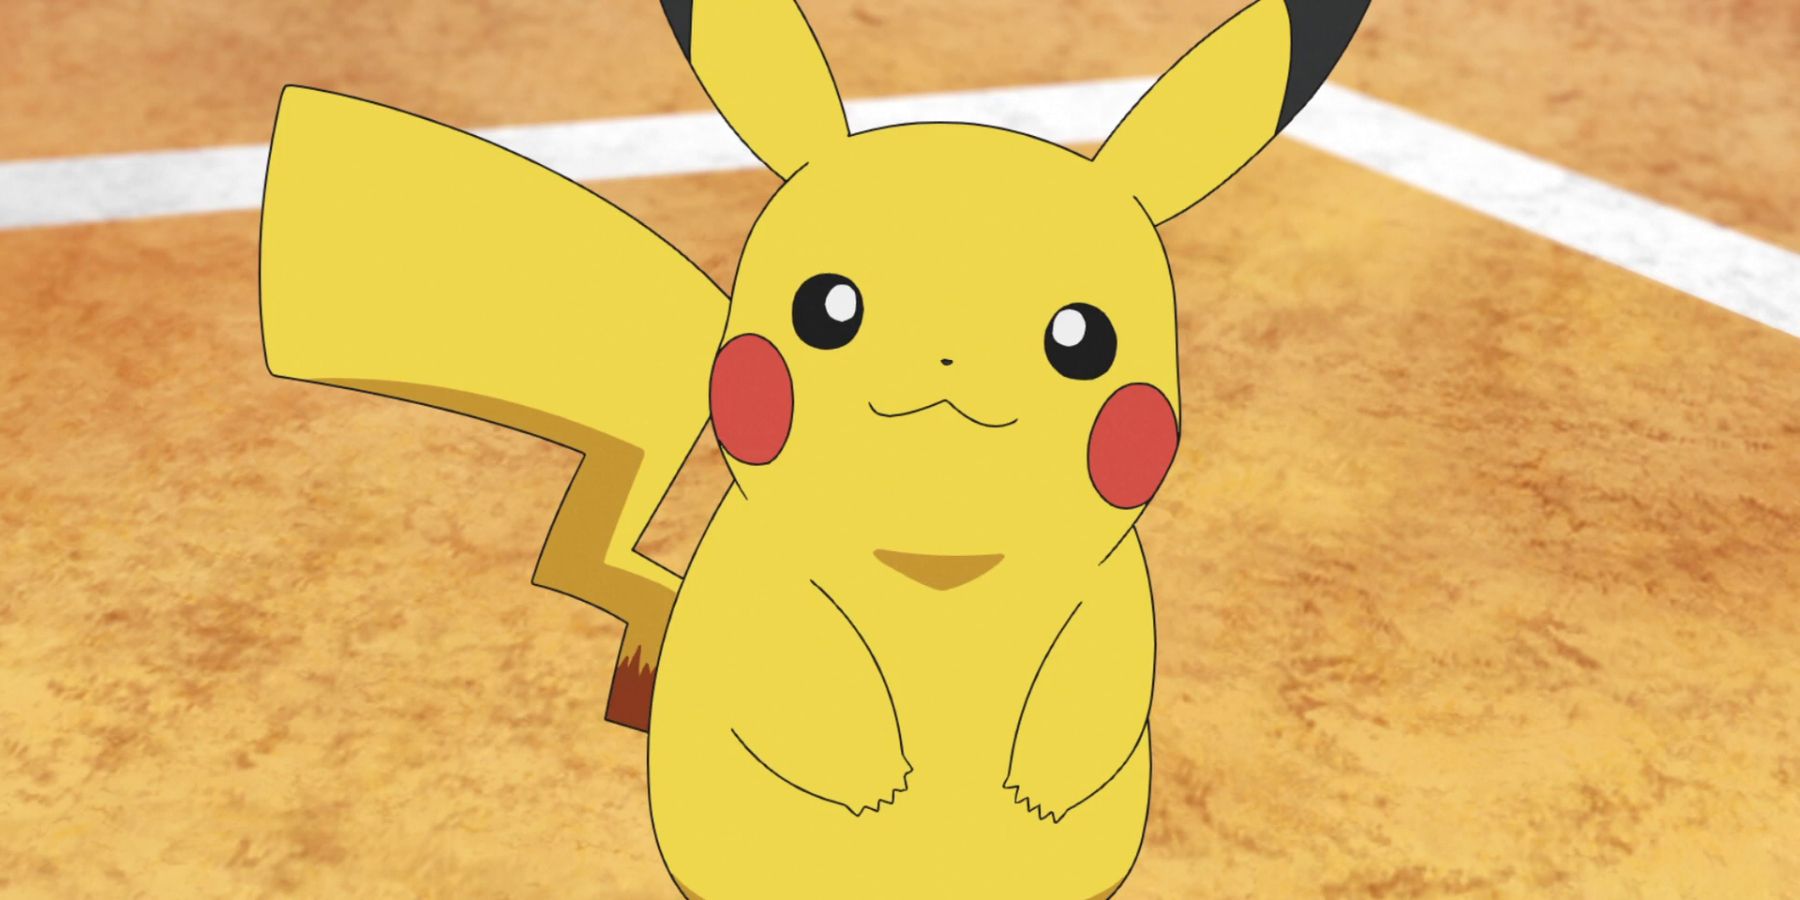 Pokémon Ash's Pikachu looking up and smiling